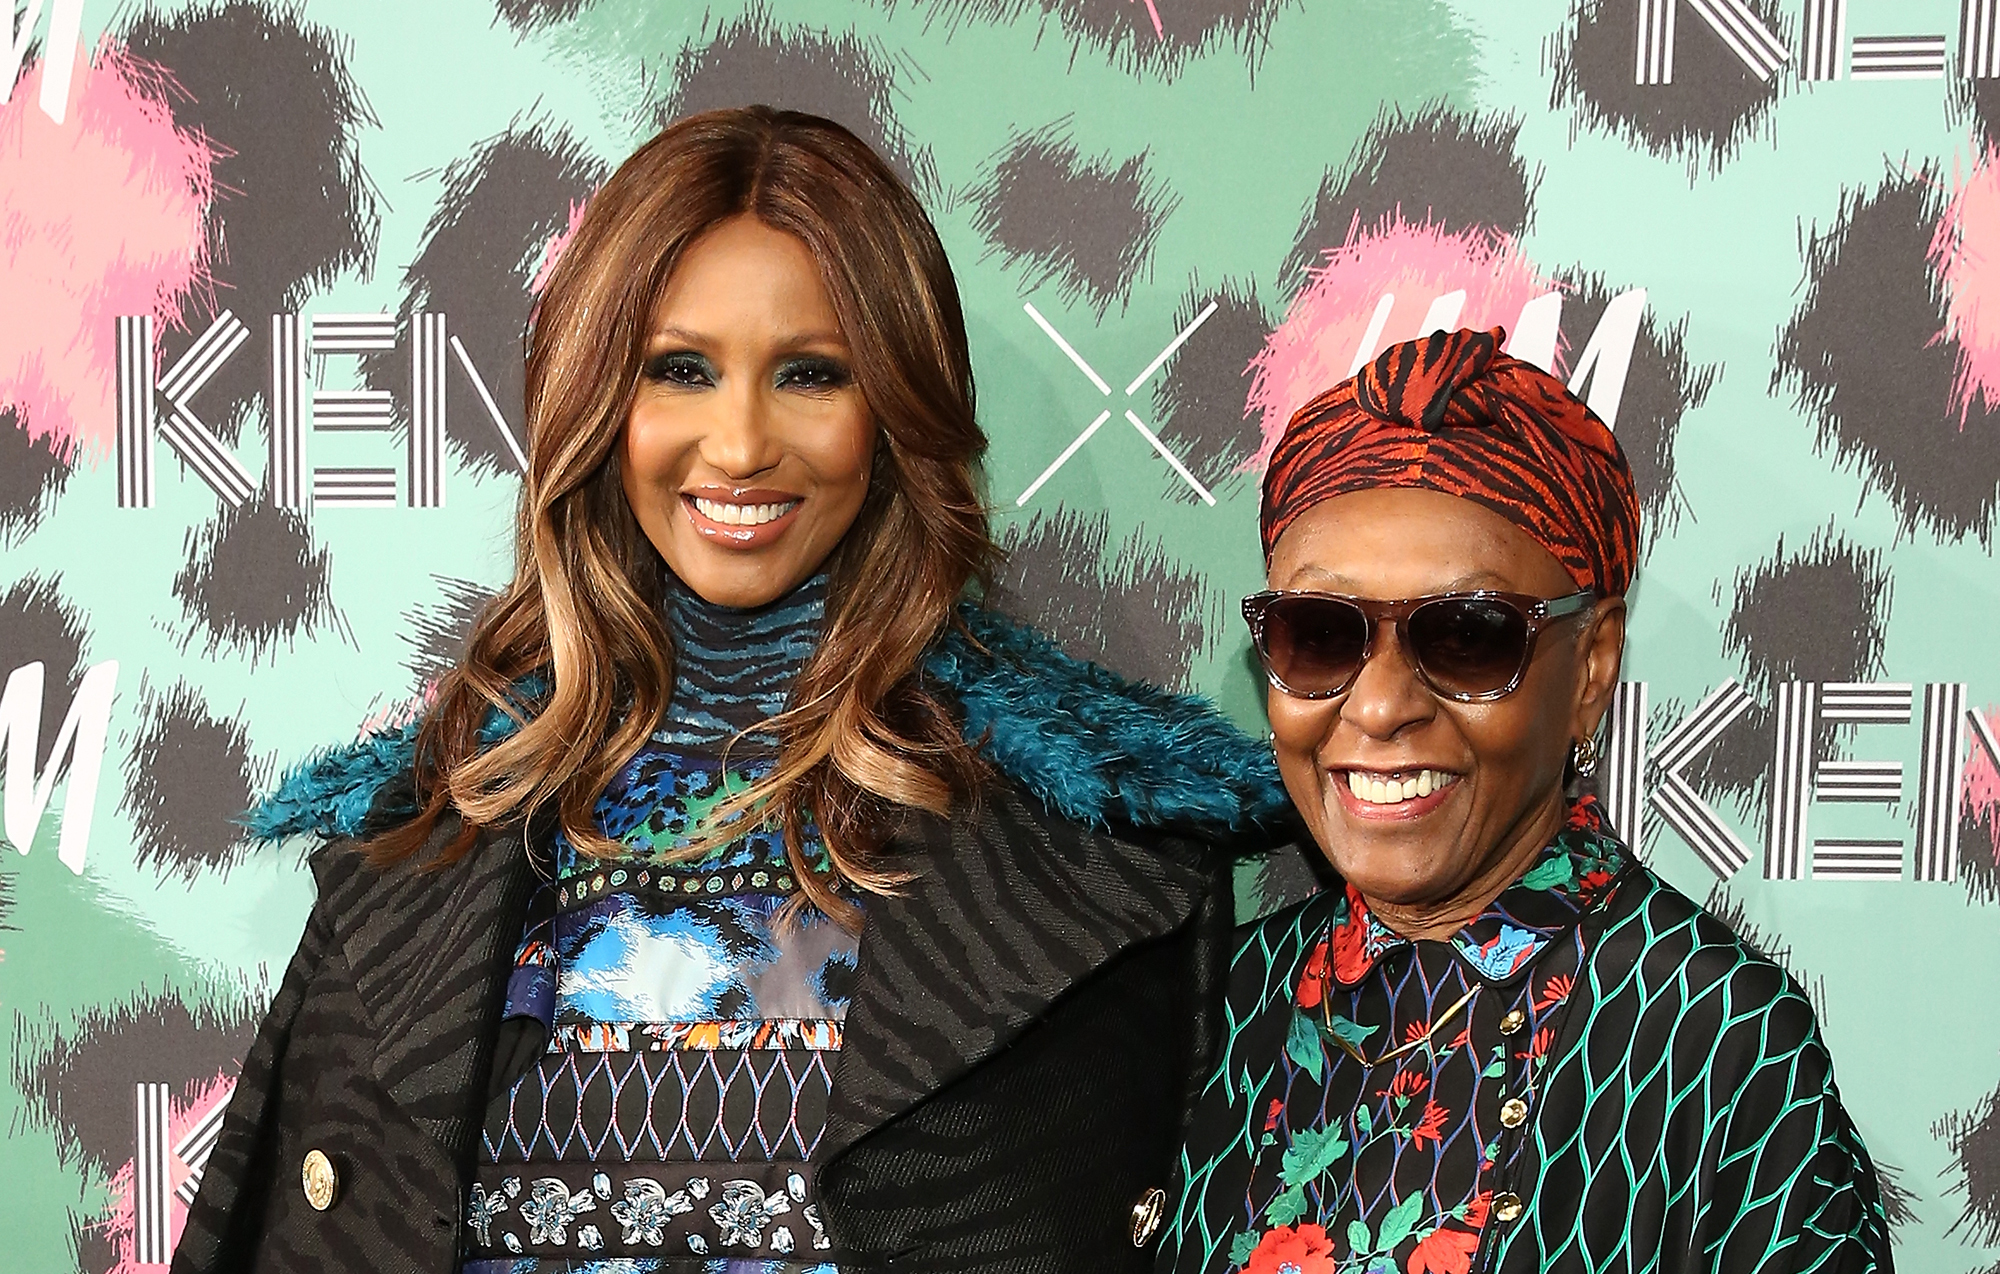 Iman and Bethann Hardison attend KENZO x H&amp;M - Arrivals at Pier 36 on October 19, 2016 in New York City.  (Photo by Monica Schipper/WireImage) (Monica Schipper&mdash;WireImage)